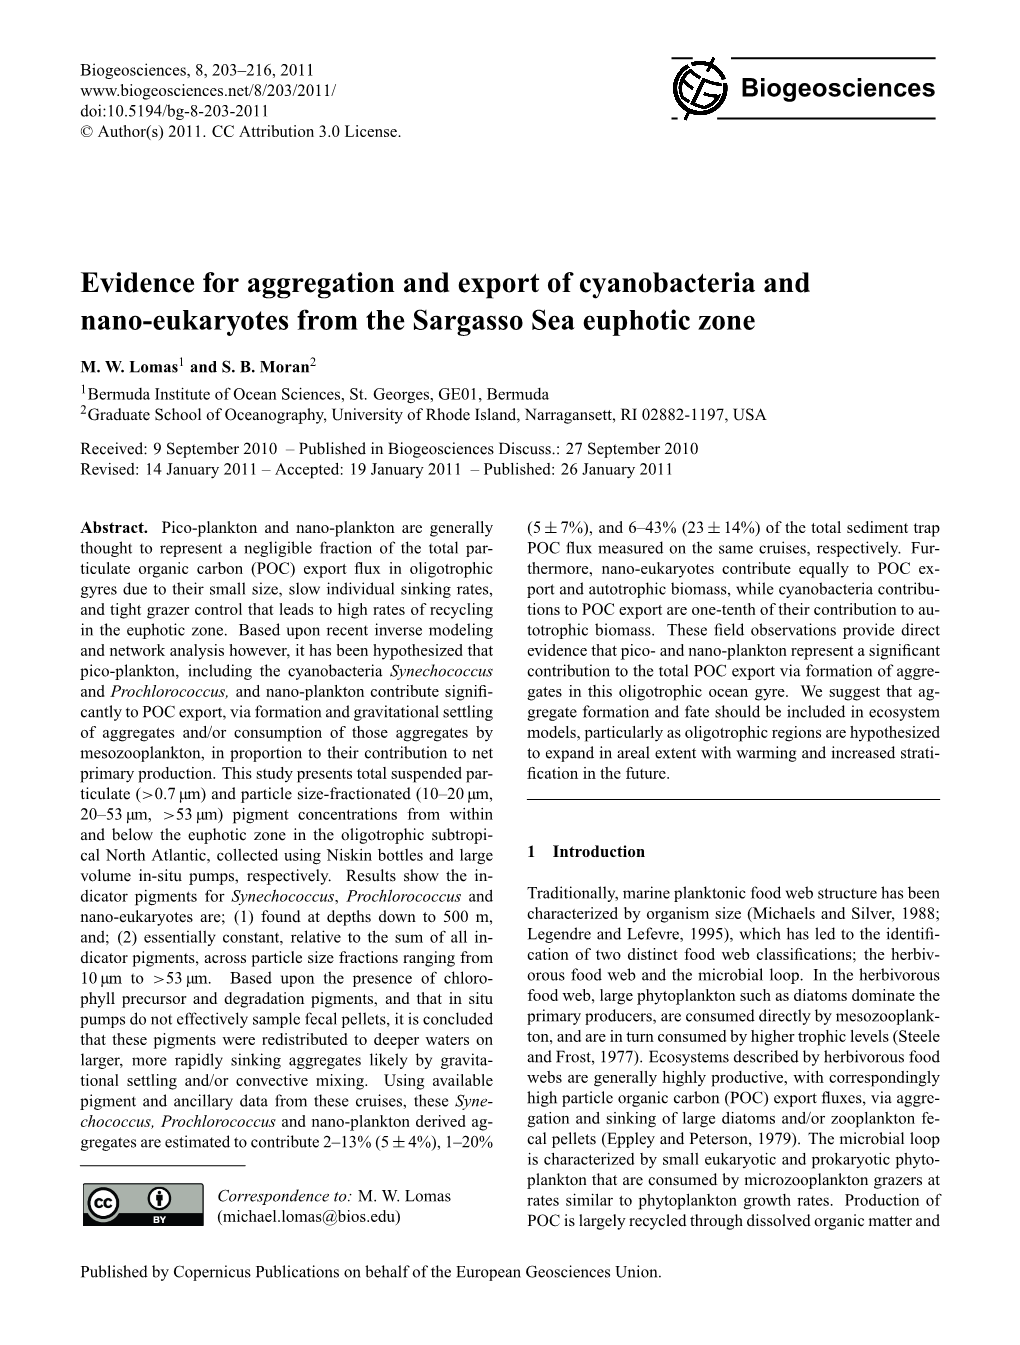 Evidence for Aggregation and Export of Cyanobacteria and Nano-Eukaryotes from the Sargasso Sea Euphotic Zone